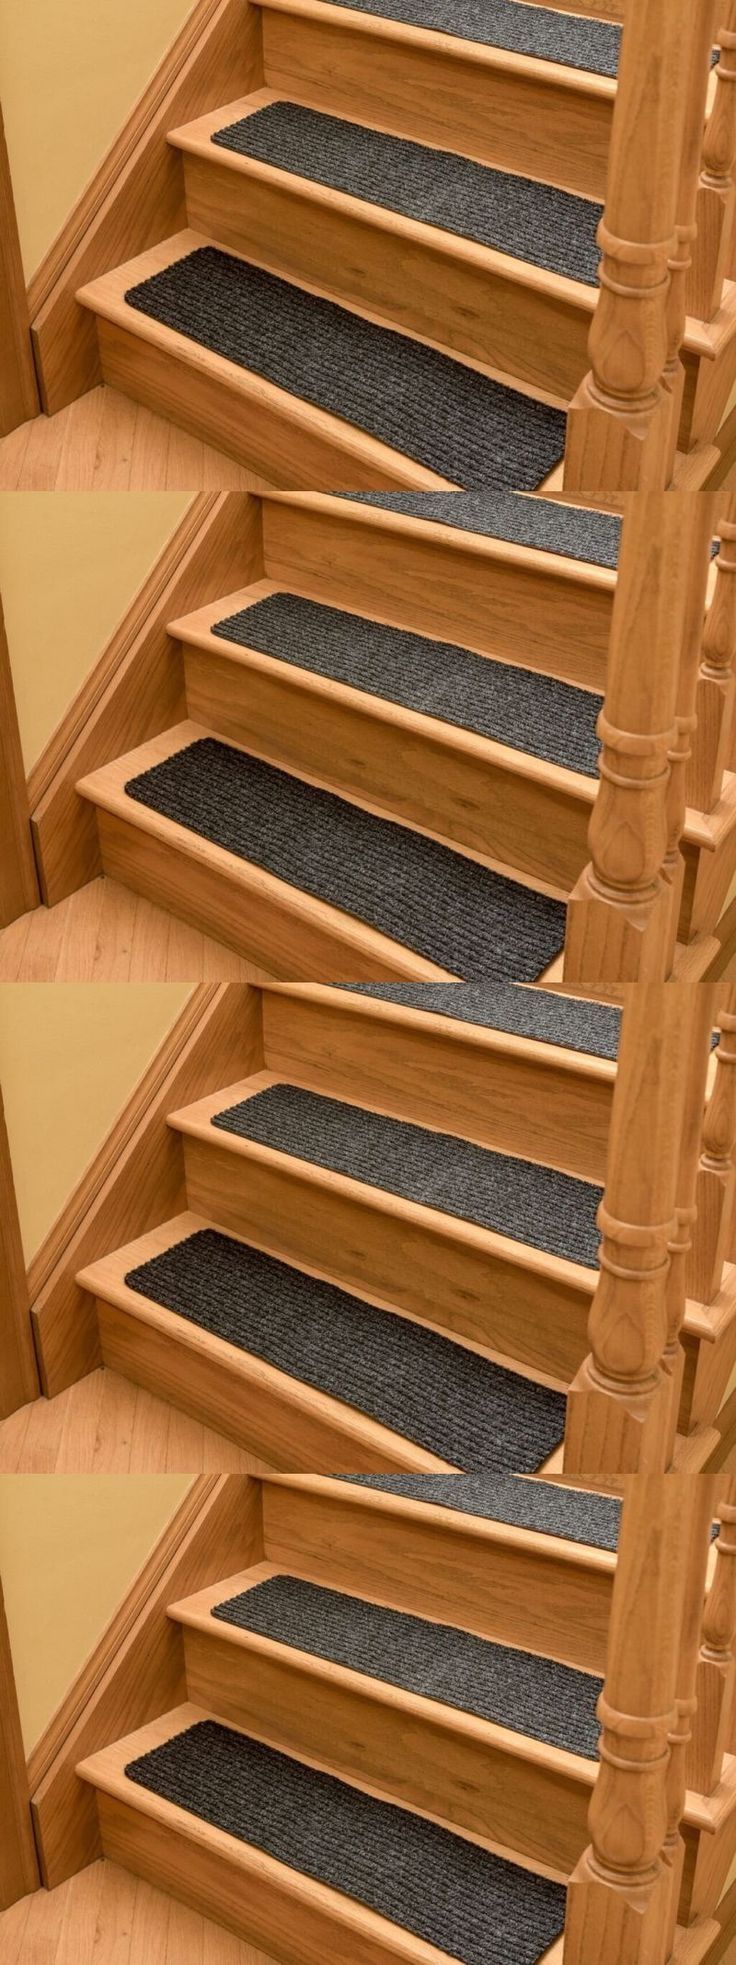 Top 25 Best Carpet Stair Treads Ideas On Pinterest Wood Stair With Basket Weave Washable Indoor Stair Tread Rugs (View 9 of 20)